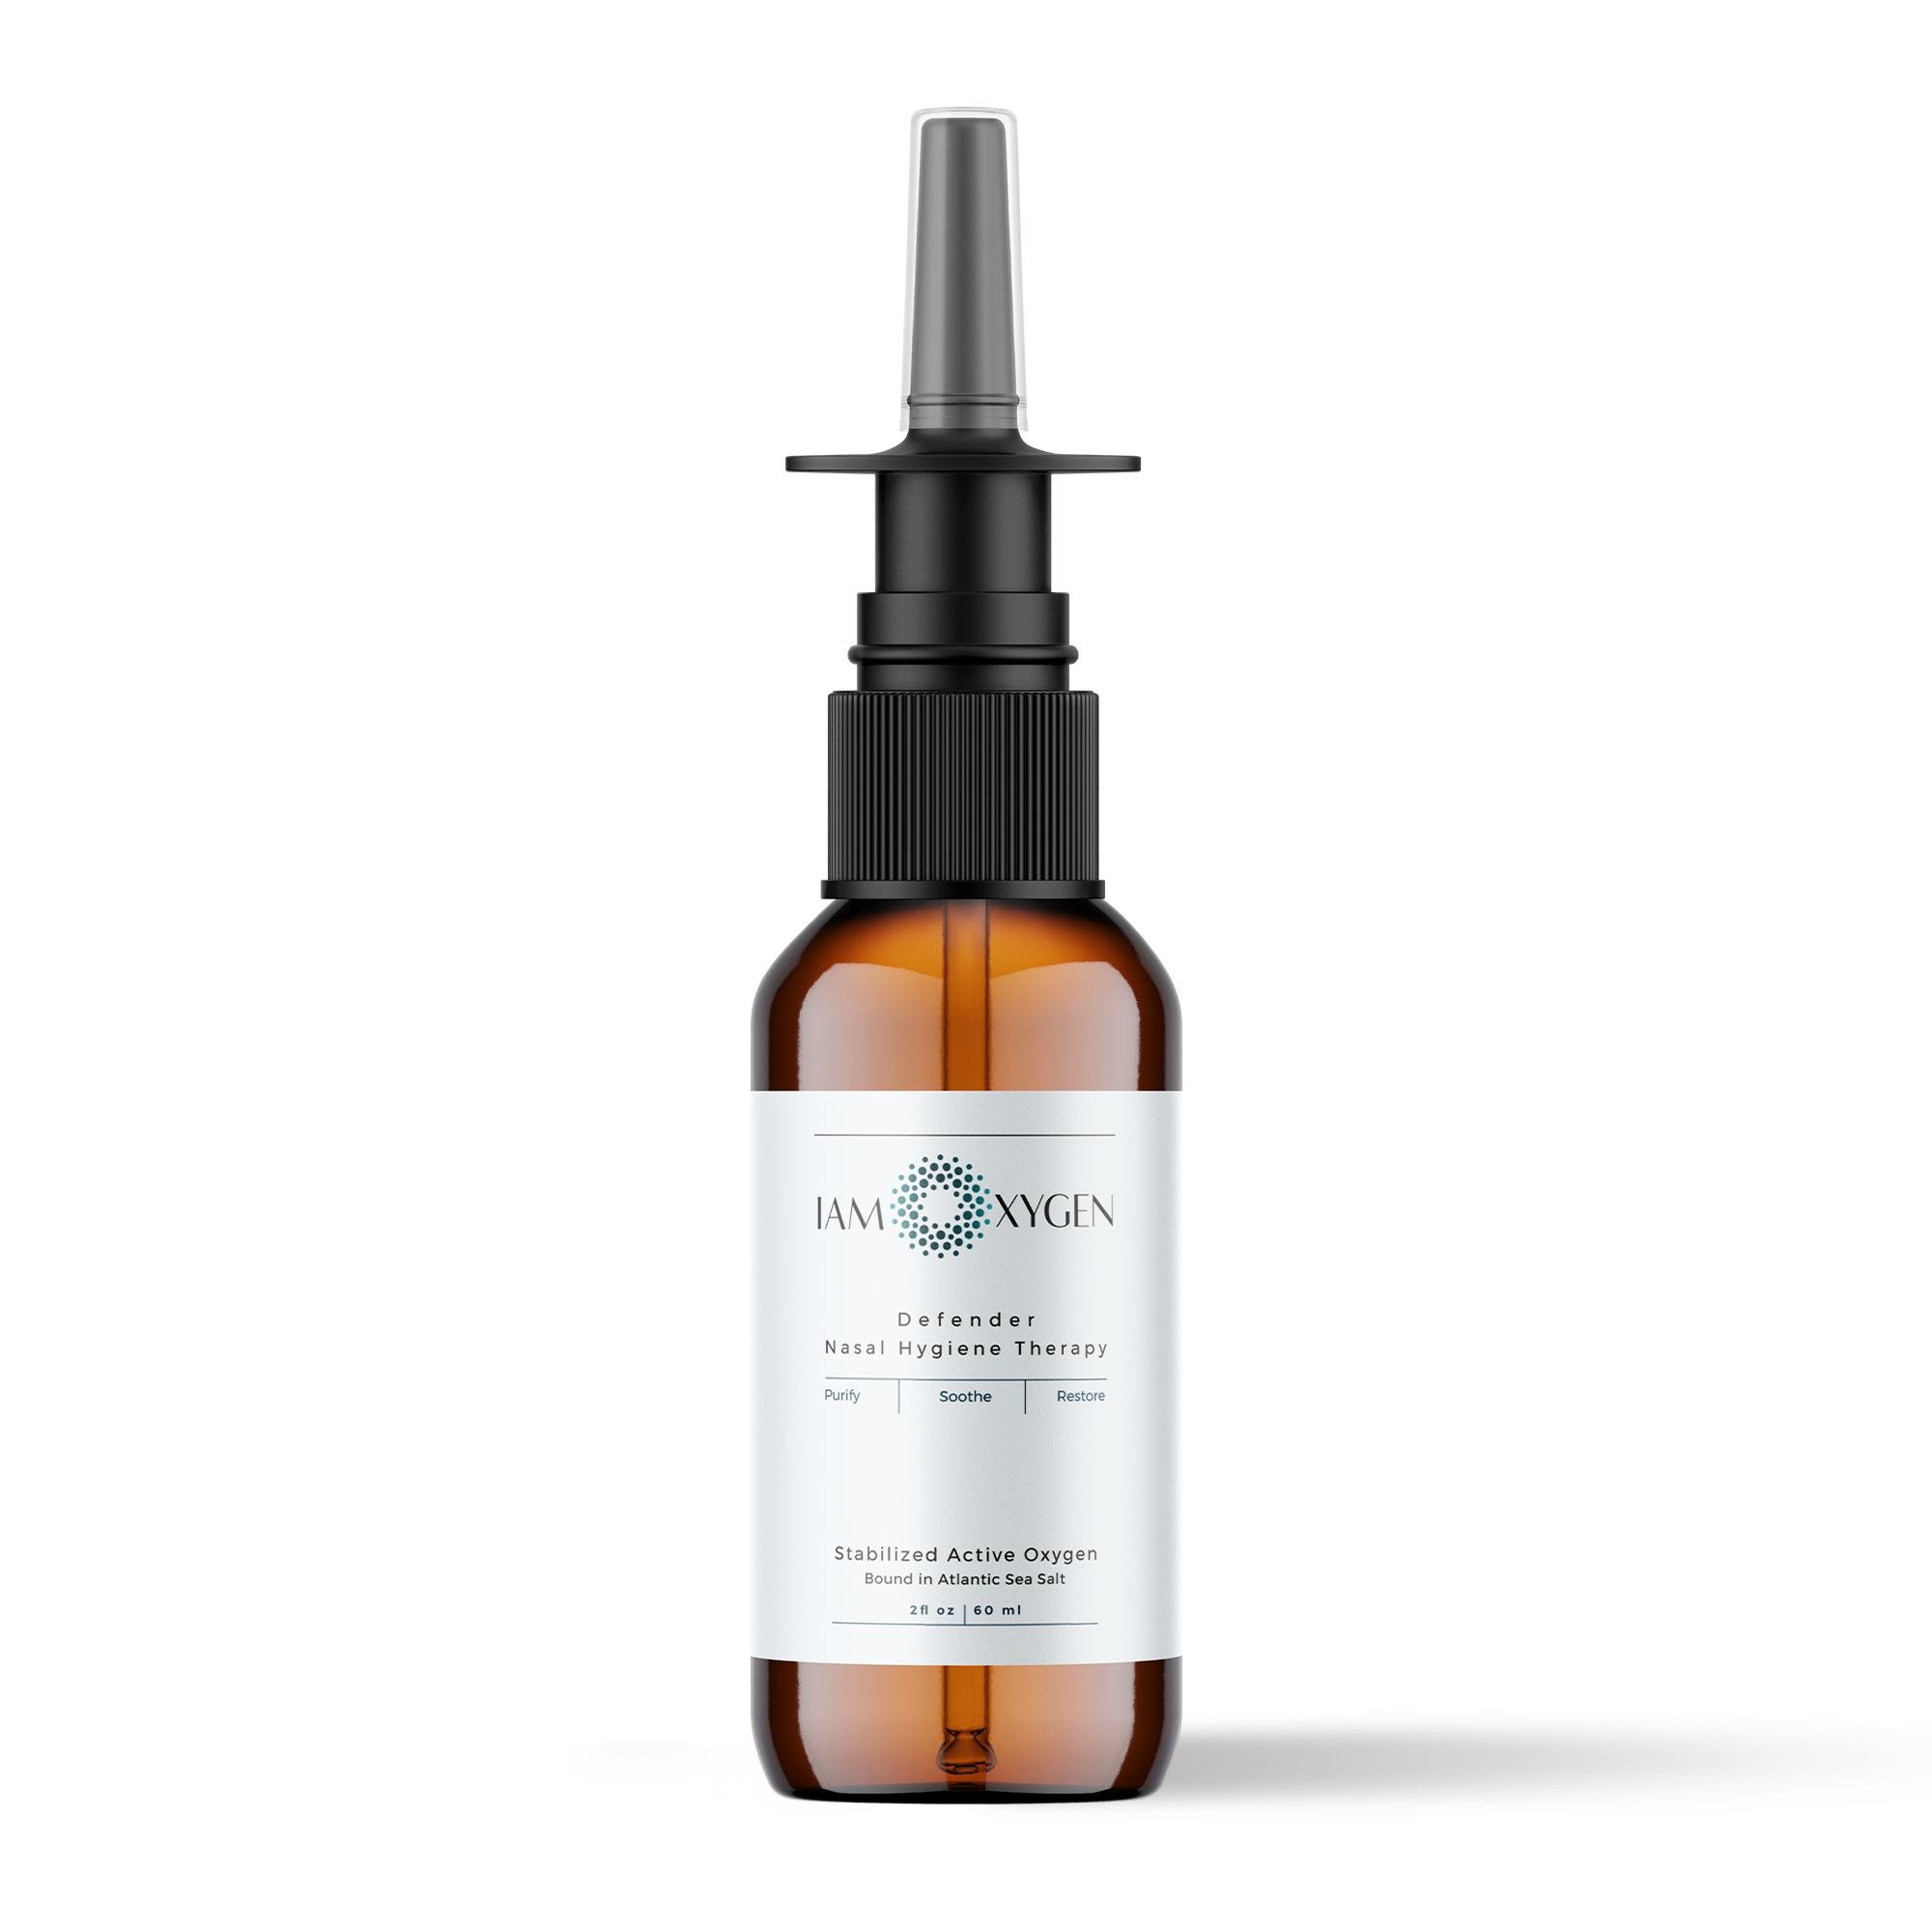 Reduce Nasal Irritation & Bacteria With This 100% Natural, Oxygen Therapy Spray